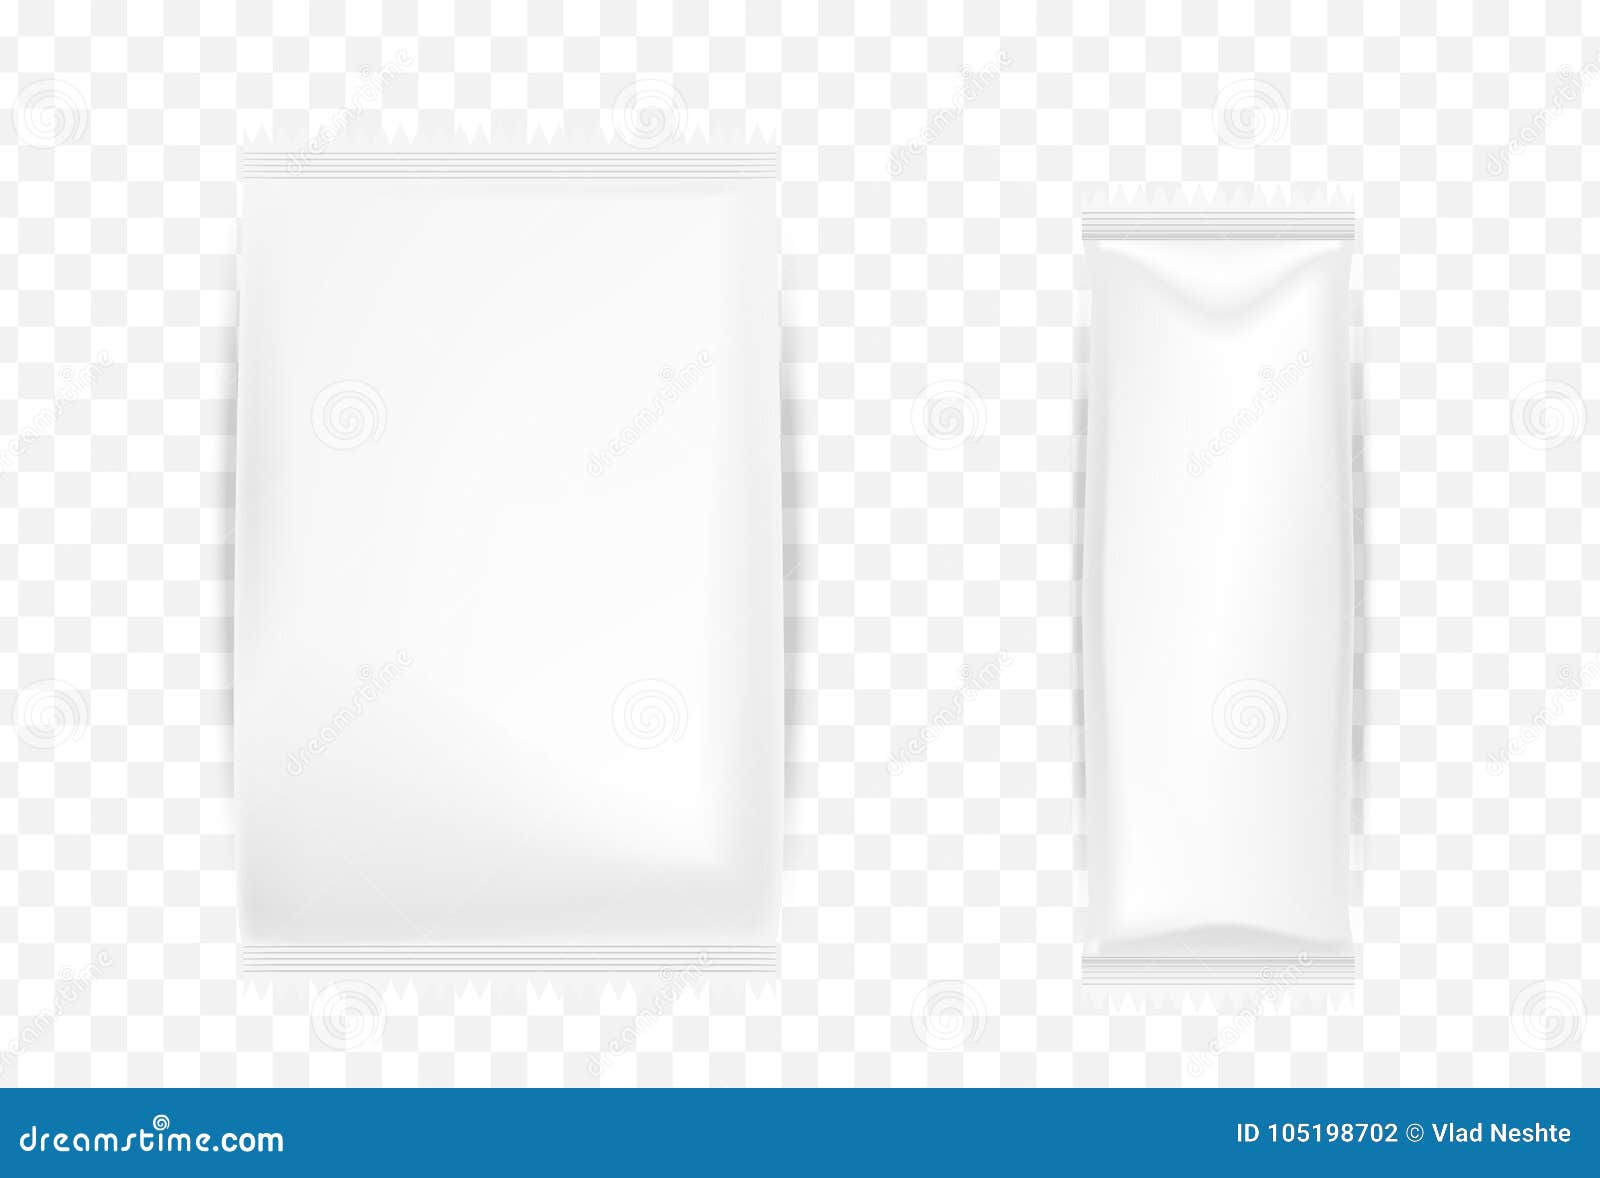 Download Mockup Of Packaging For Snacks, Bars. White Packing Bags ...